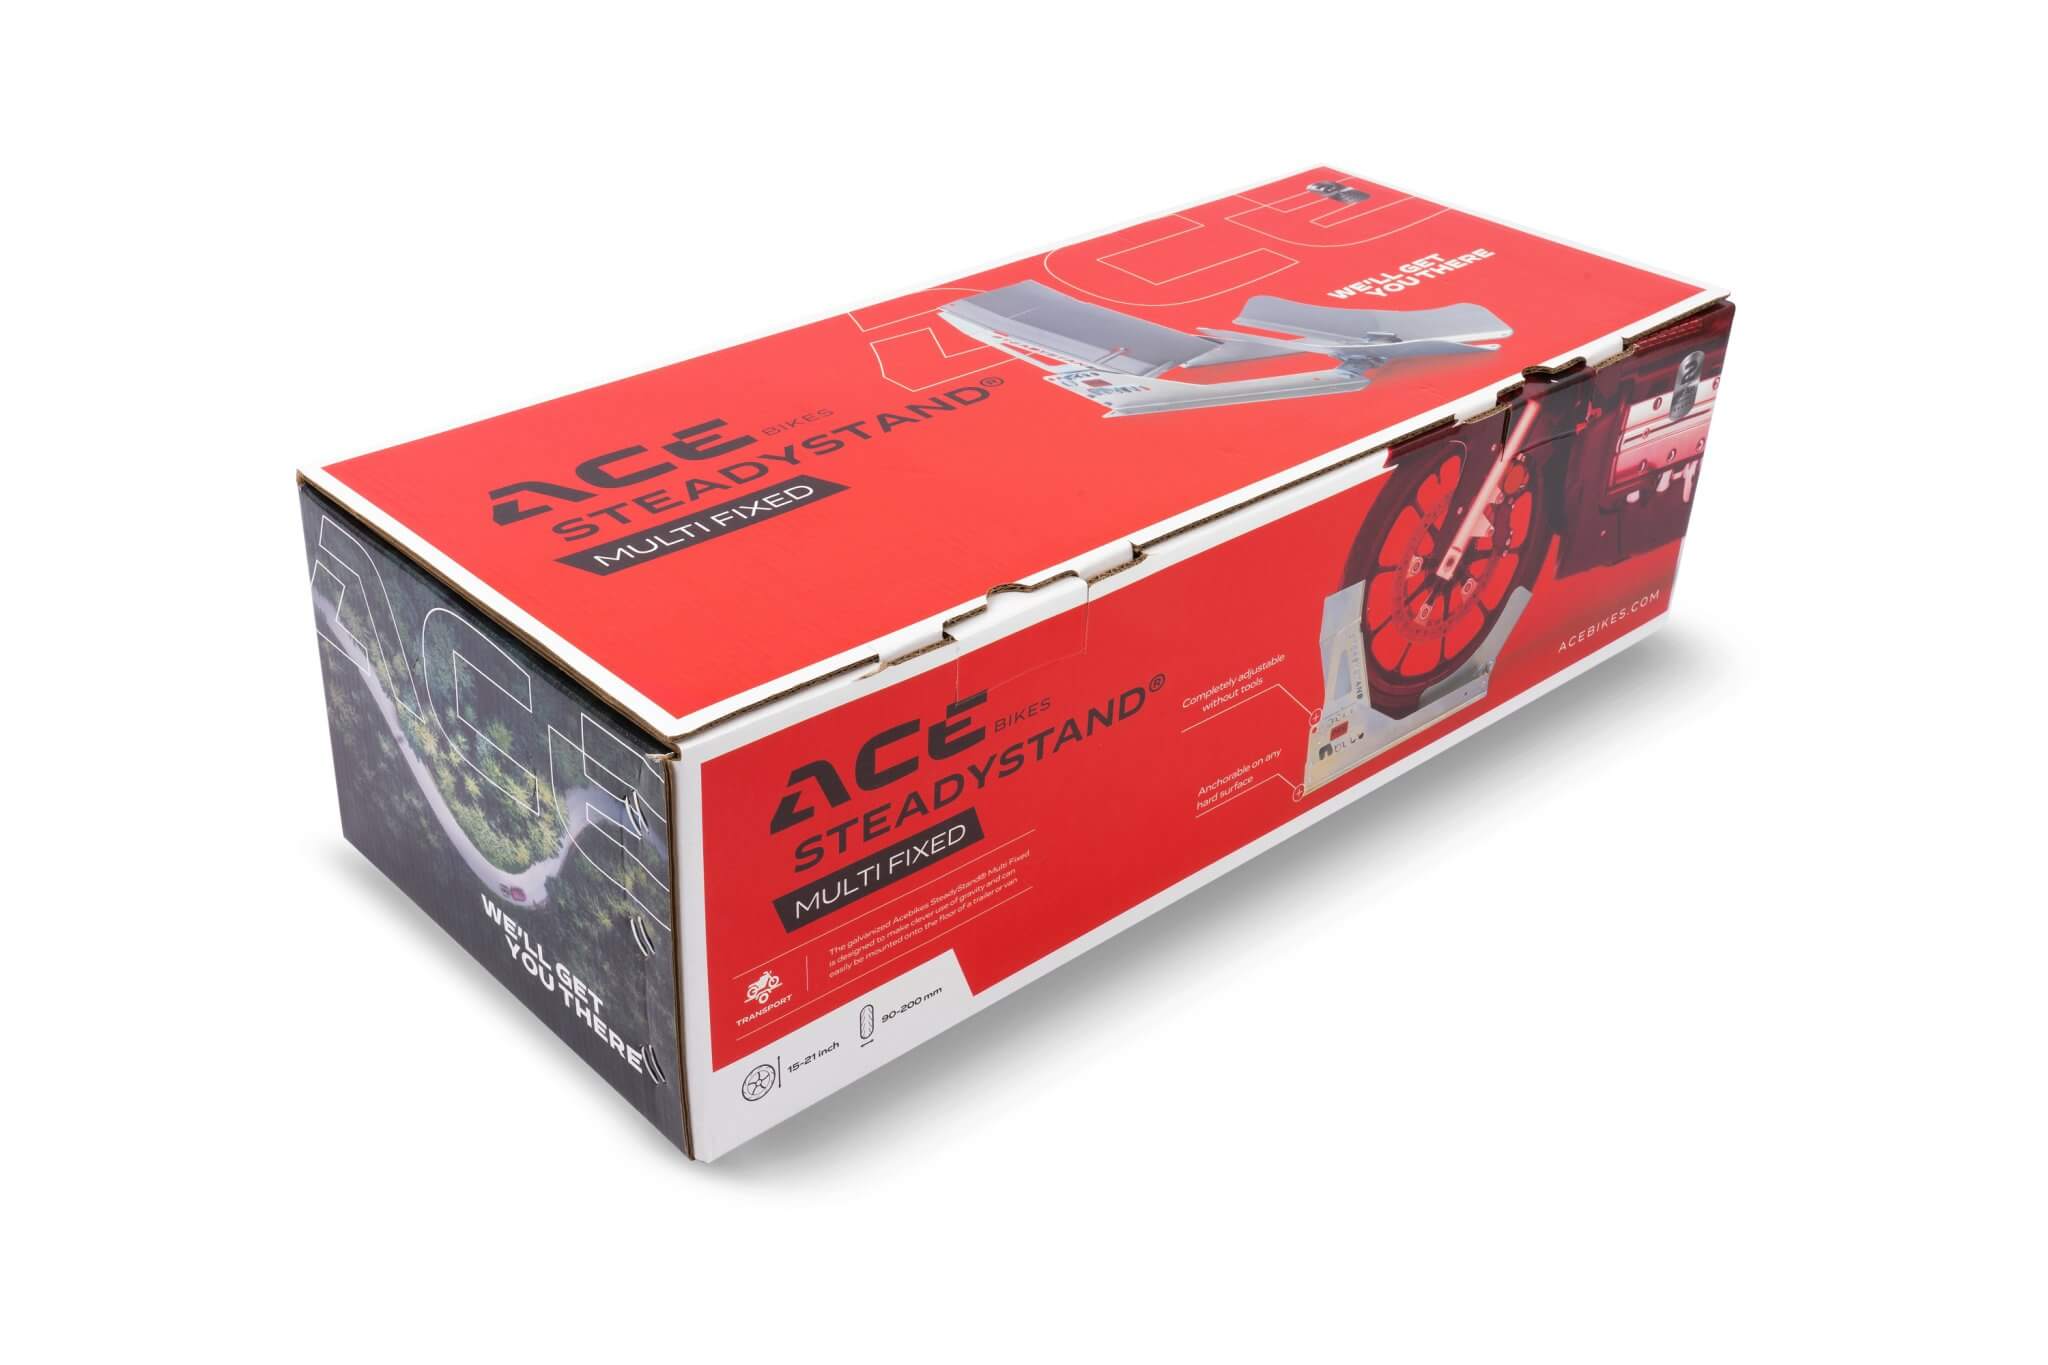 SteadyStand® Multi Fixed - Acebikes - Motorcycle Handling Solutions